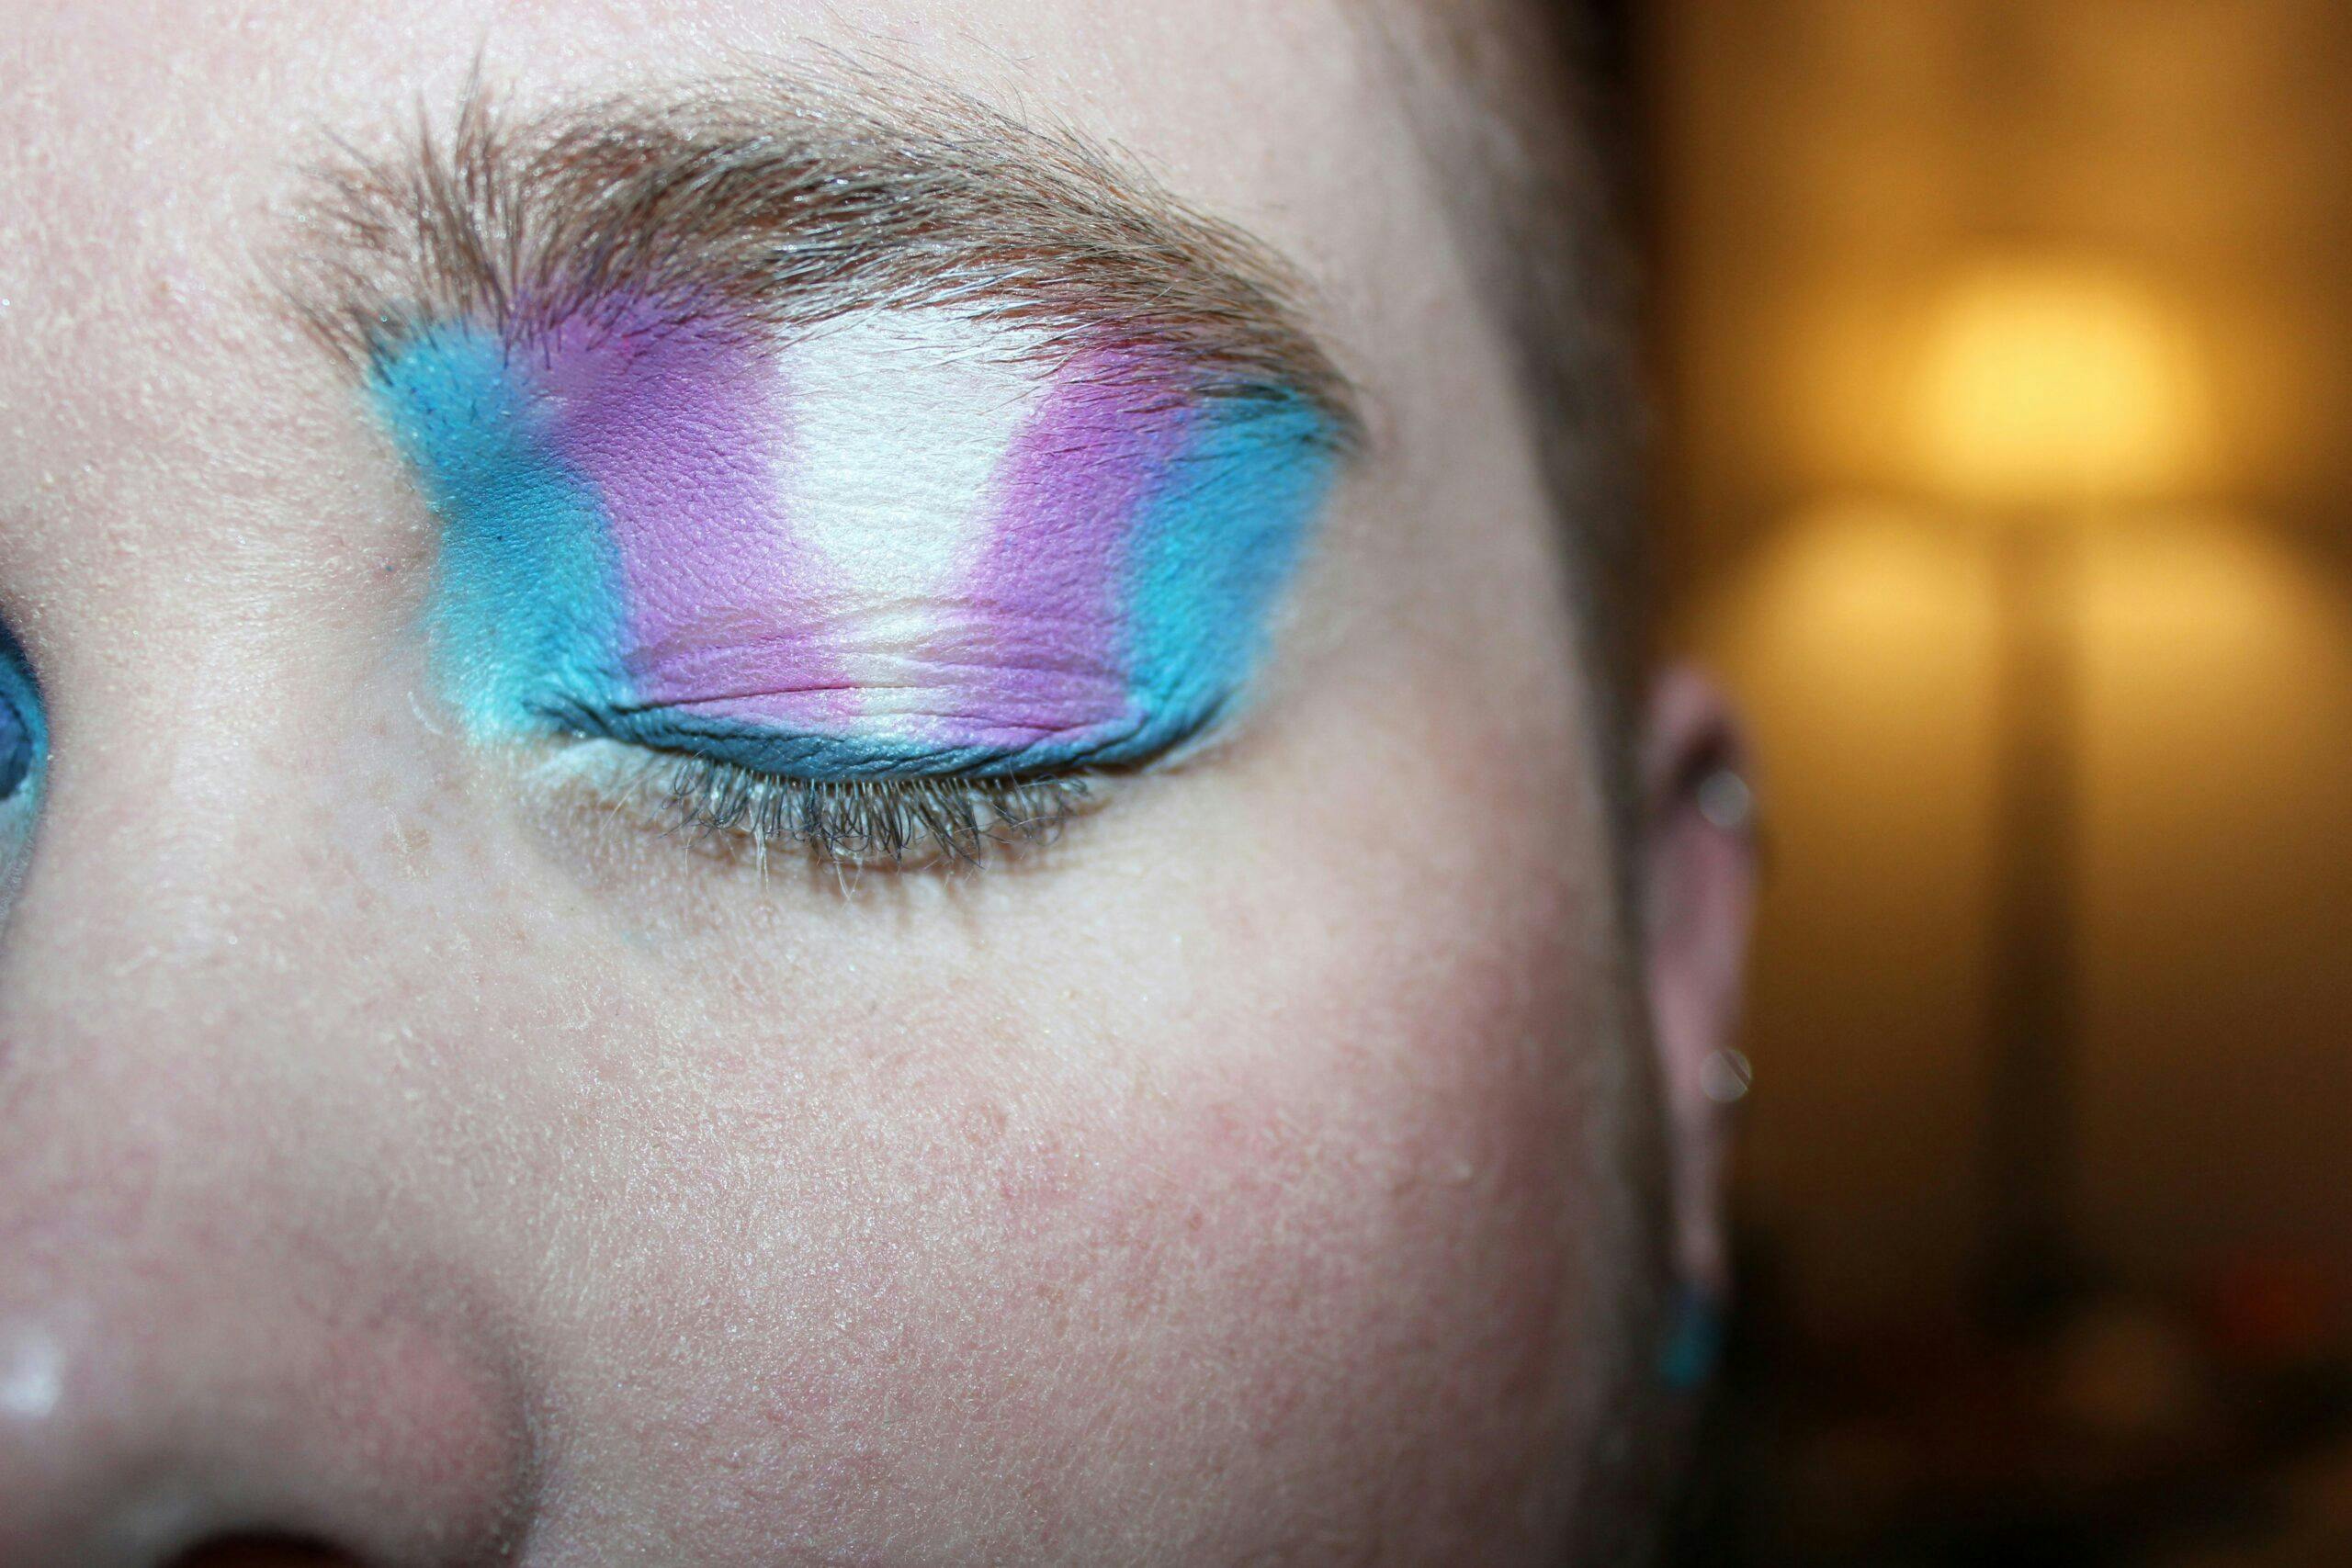 A person wearing eyeshadow in the colours of the transgender flag.